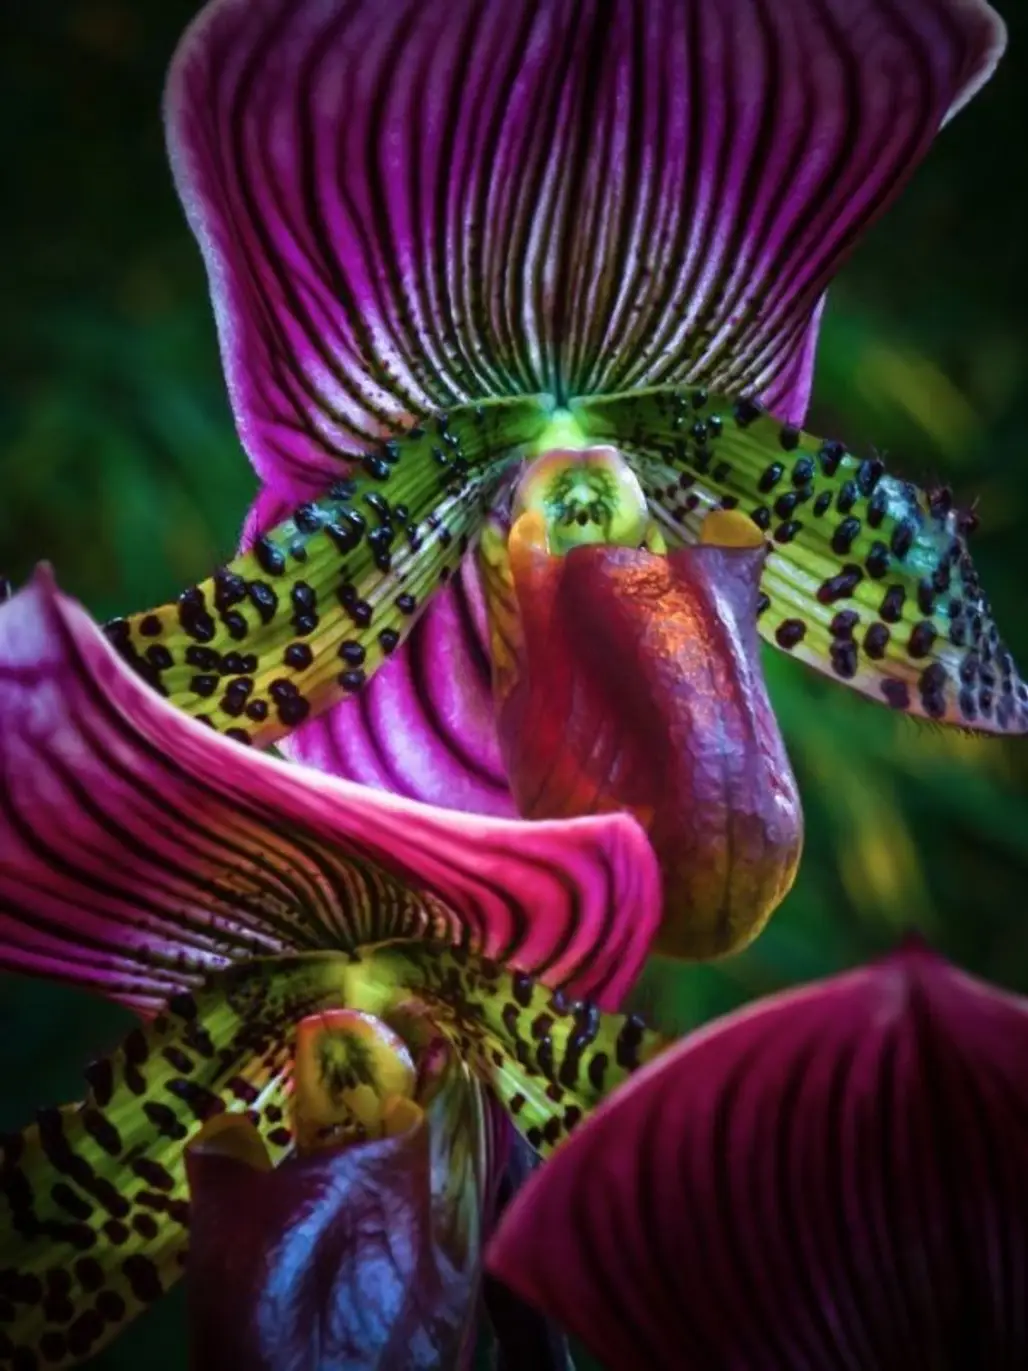 Ruby Leopard Slipper Orchid